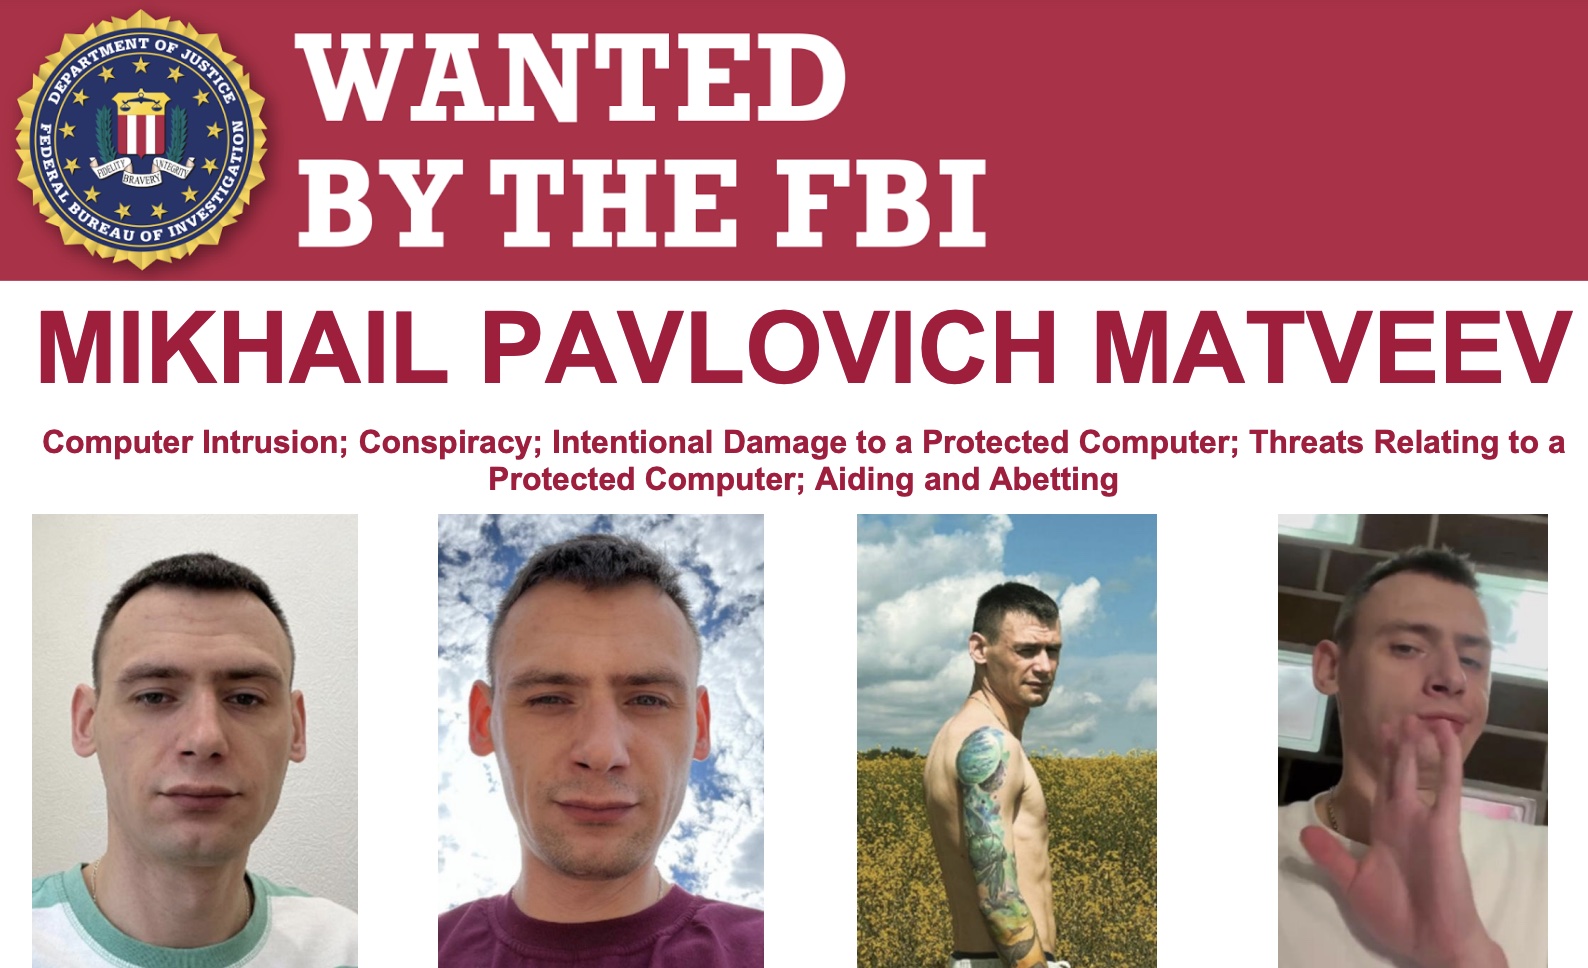 Matveev most wanted poster